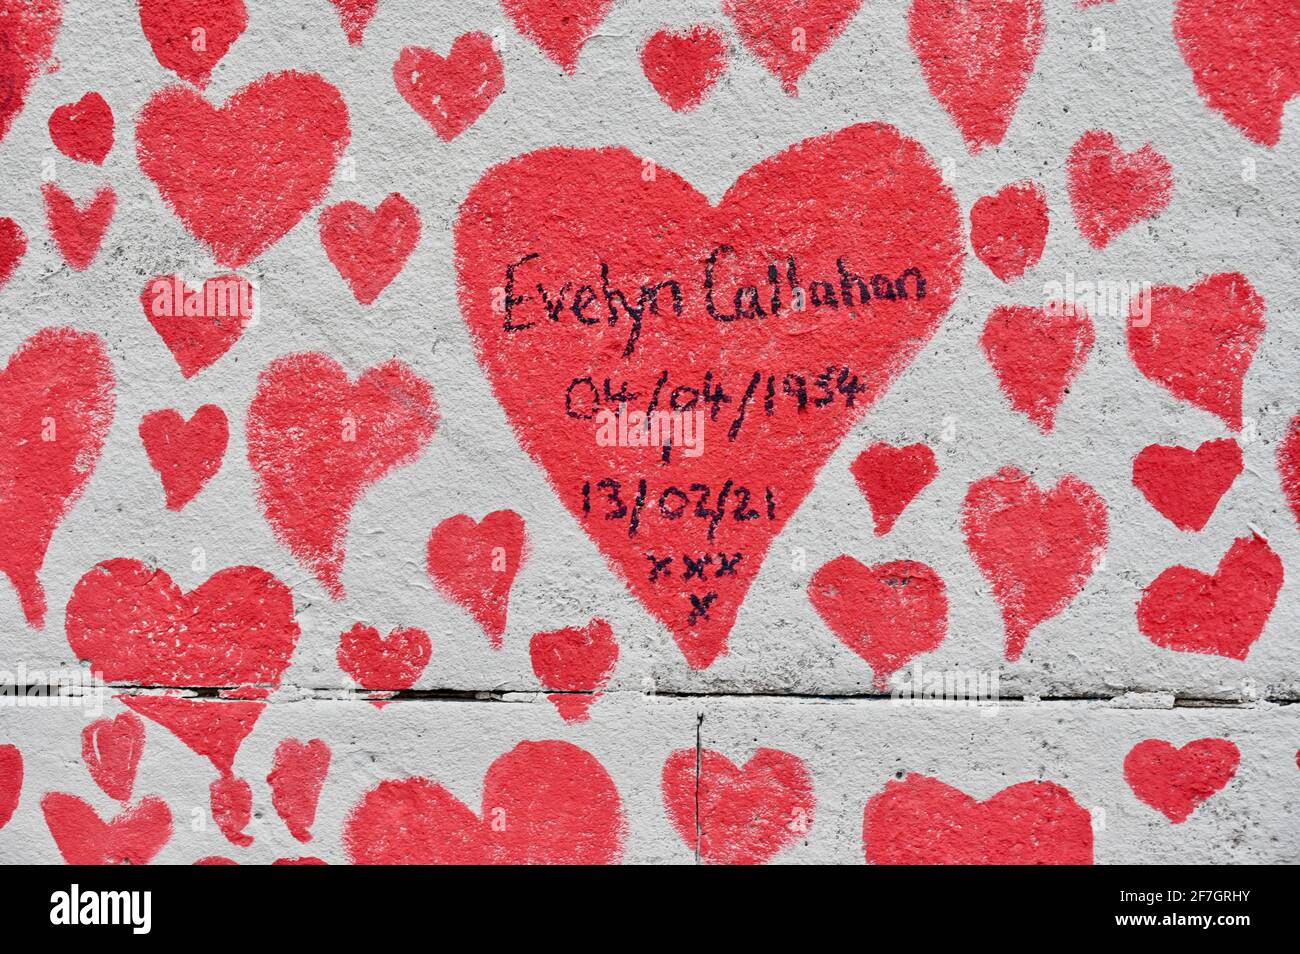 National Covid Memorial Wall, Around 130,000 hearts have been painted on a kilometre long section of wall opposite the Houses of Parliament as a memorial to those who have died from Coronavirus. St Thomas' Hospital, Westminster, London. UK Stock Photo